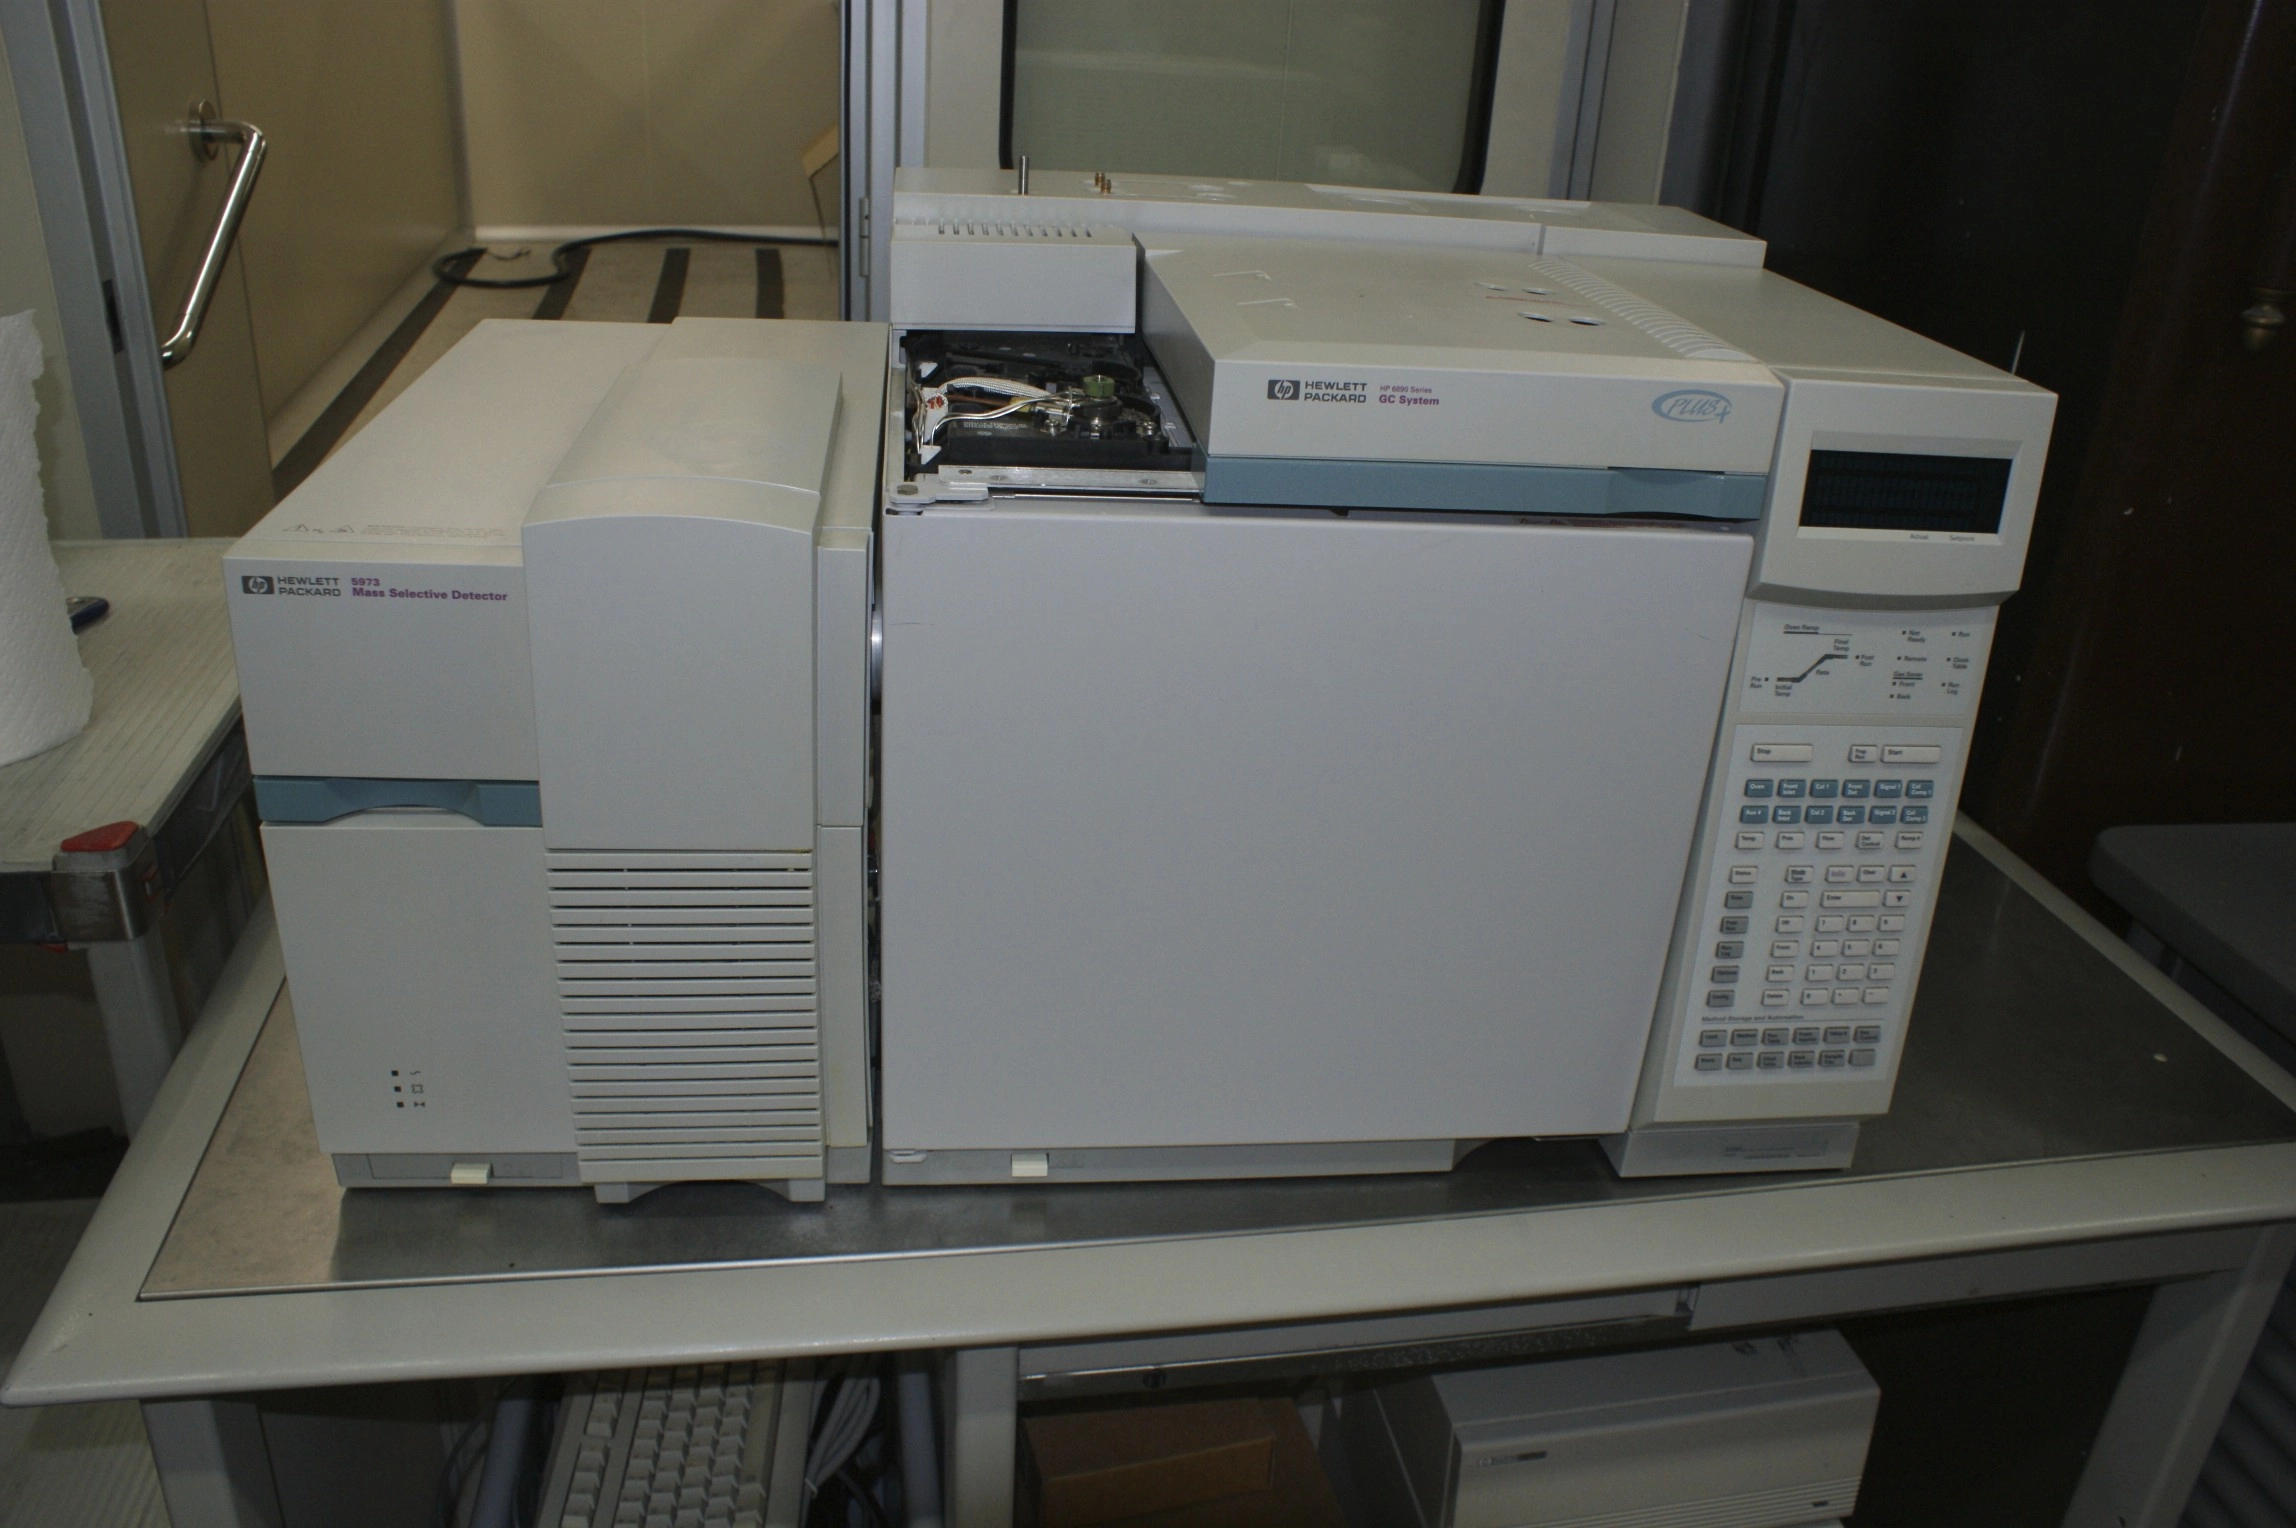 Agilent 6890 Gas Chromatograph with with Agilent 5973 Mass Spectrometer used ships refurbished- inquire to confirm availabili